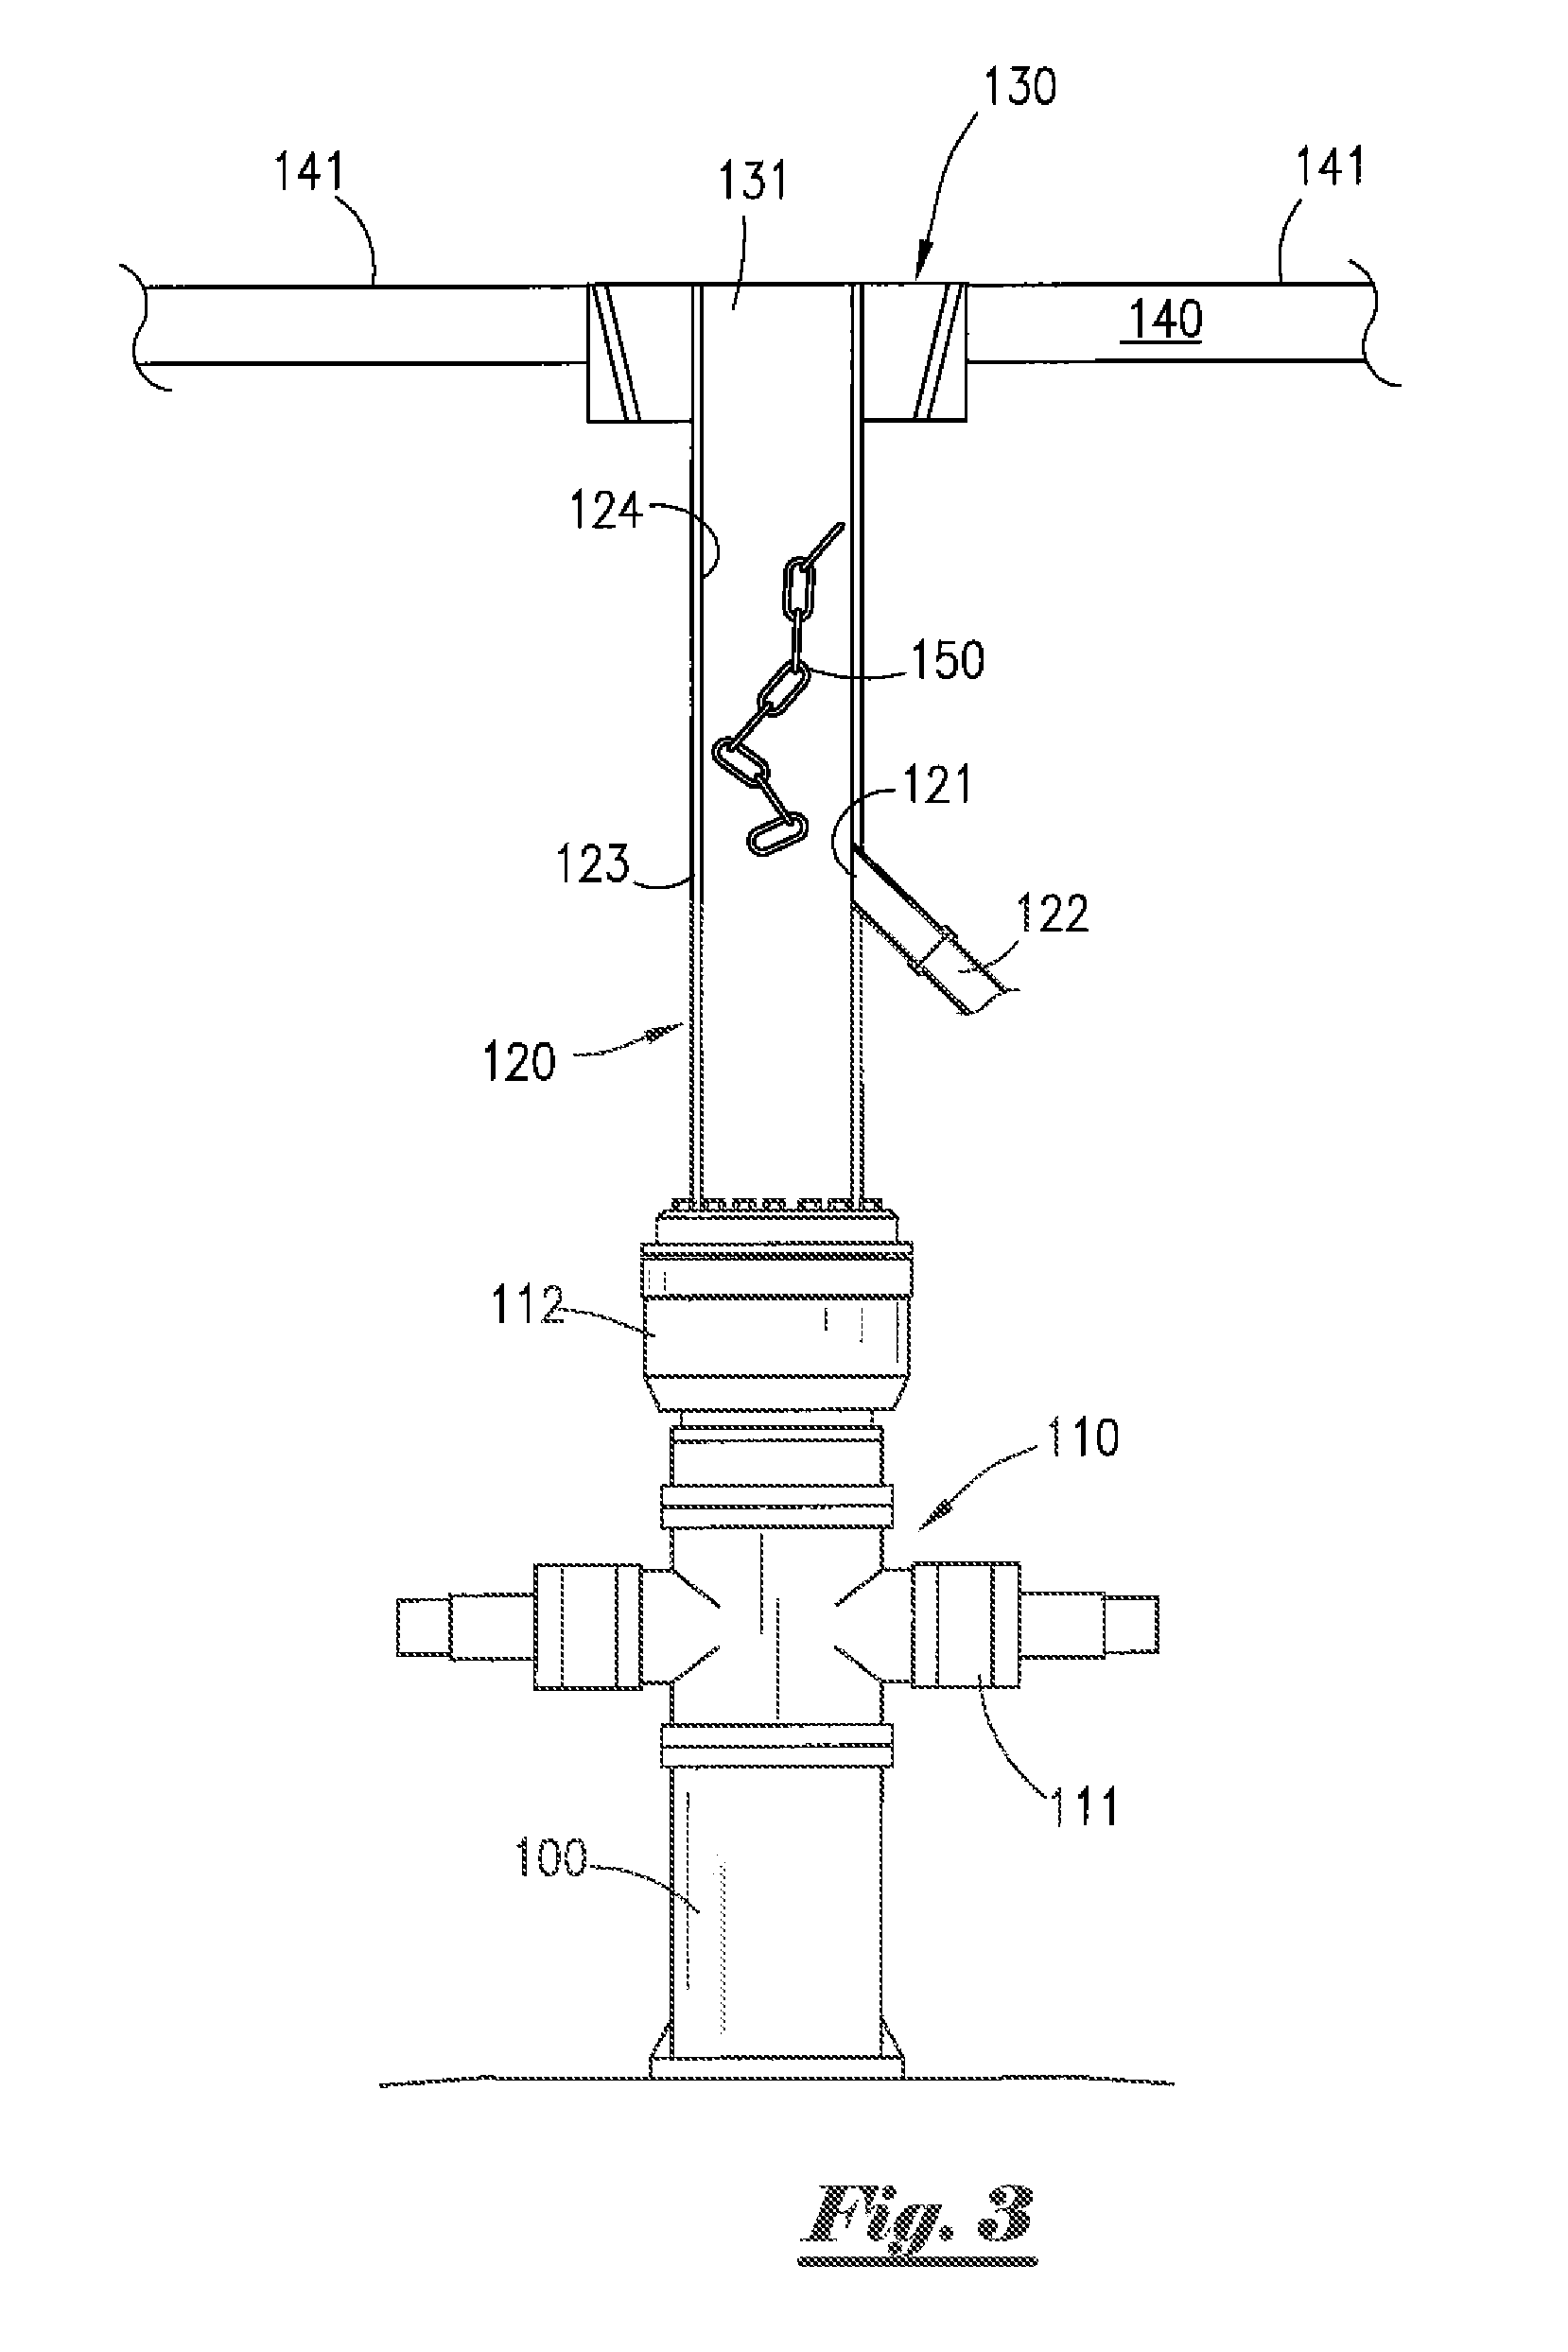 Method and Apparatus for Catching and Retrieving Objects in a Well